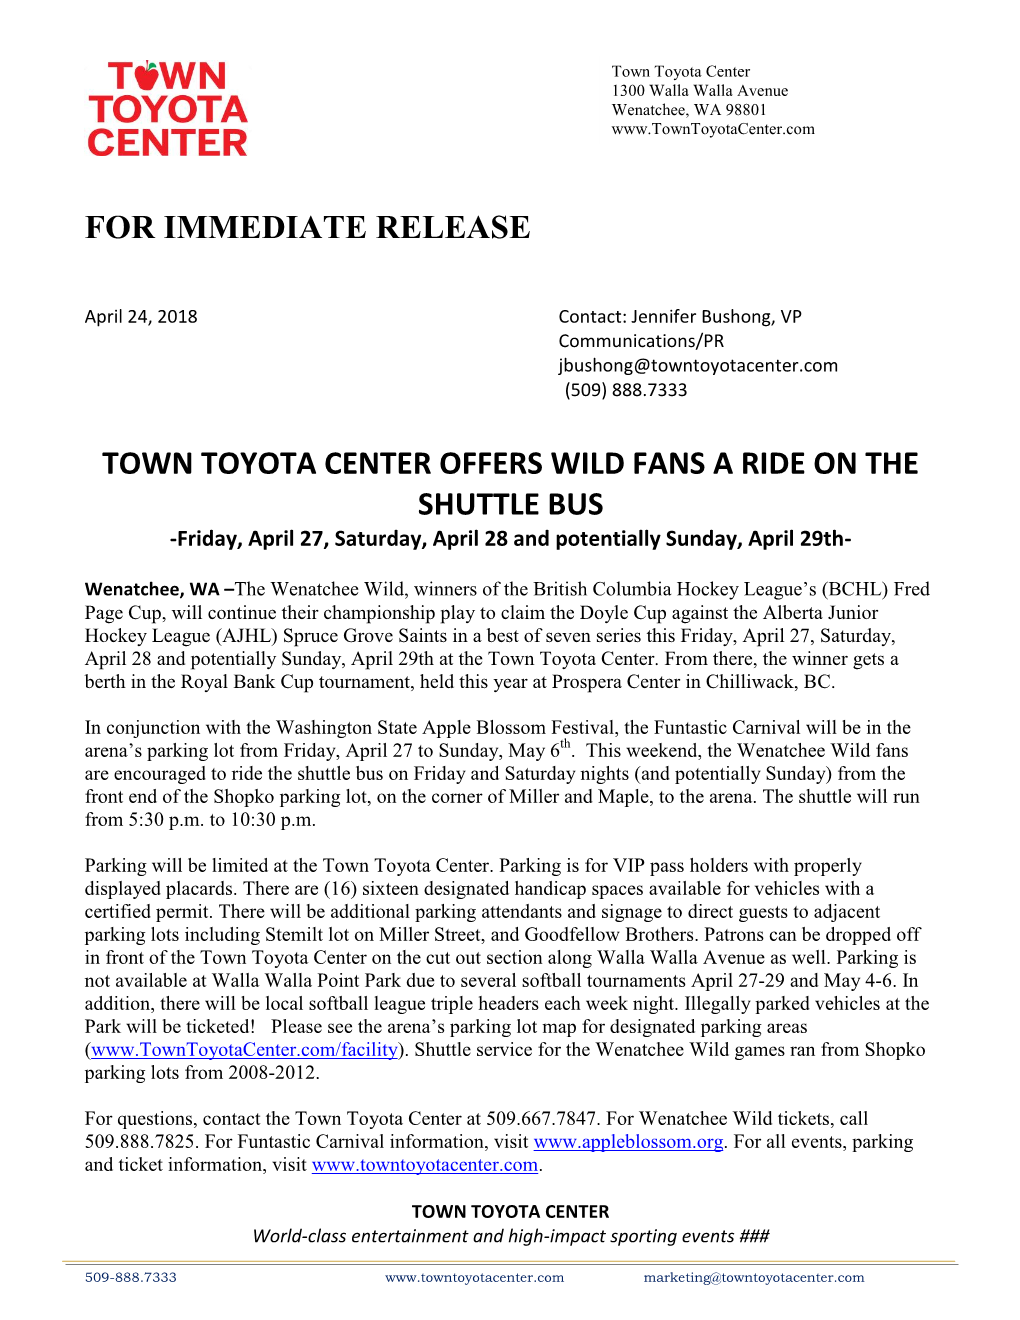 For Immediate Release Town Toyota Center Offers Wild